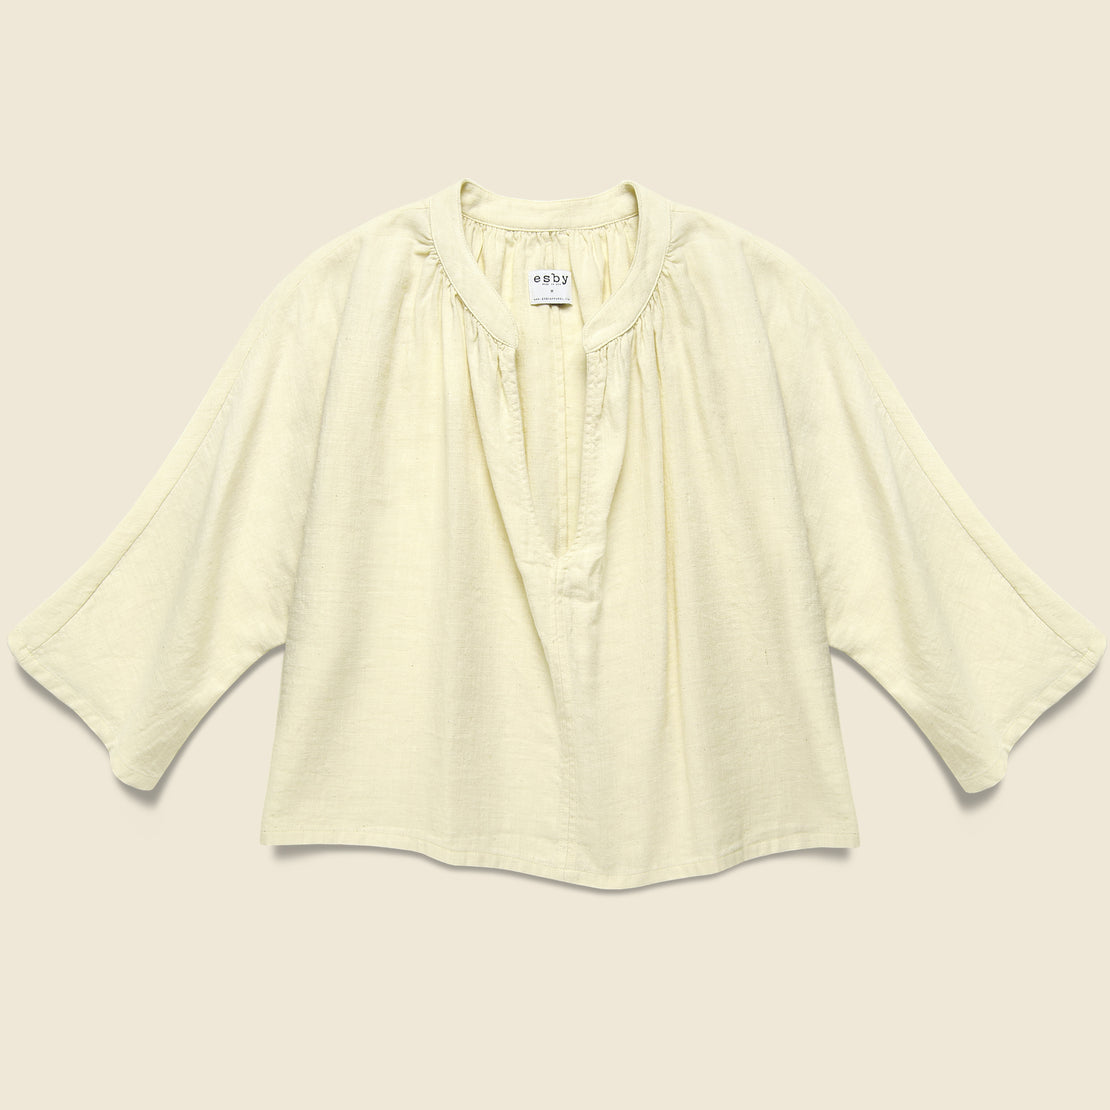 Esby Lily Top - Natural